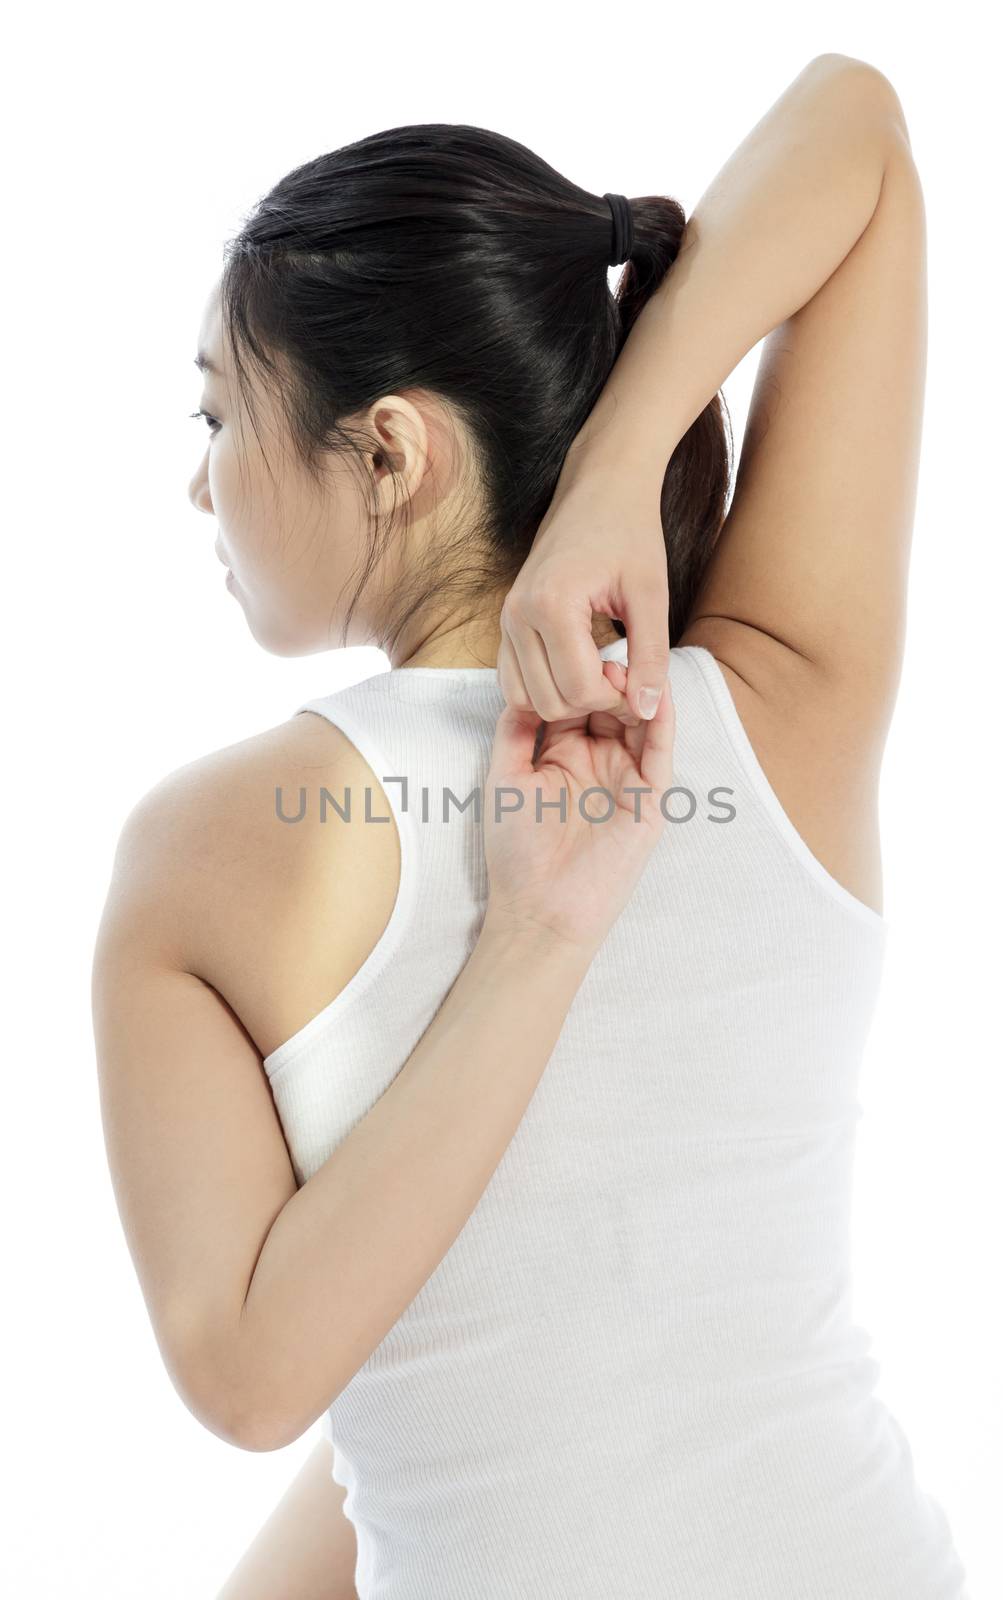 Attractive asian girl 20 years old shot in studio by shipfactory